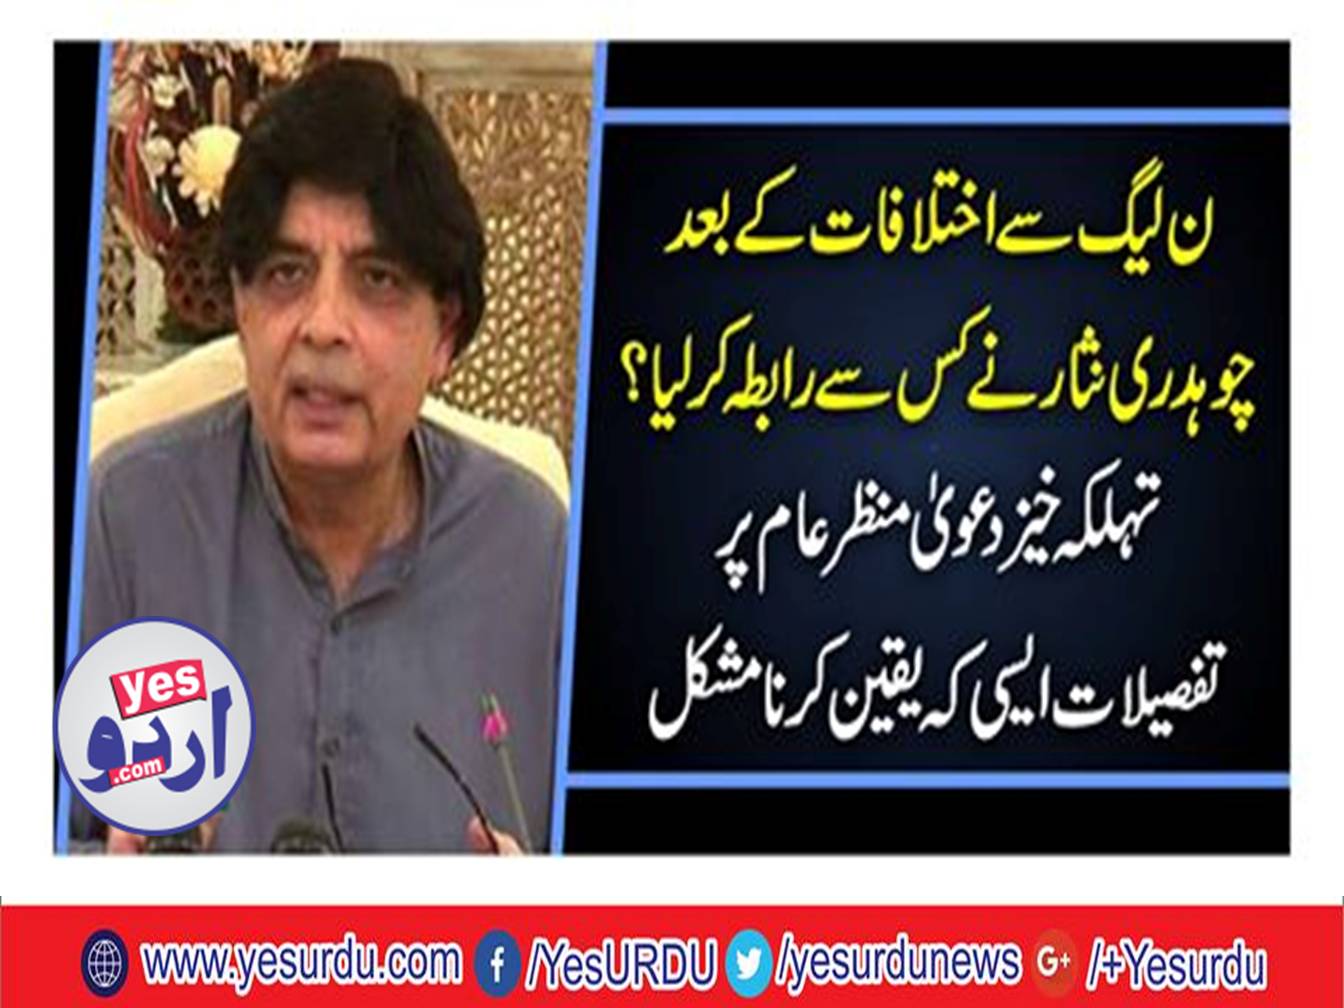 Former federal minister, Chaudhry Nisar, contacted for the support with Jama'at-ud-Da'wah ameer Hafiz Saeed in elections